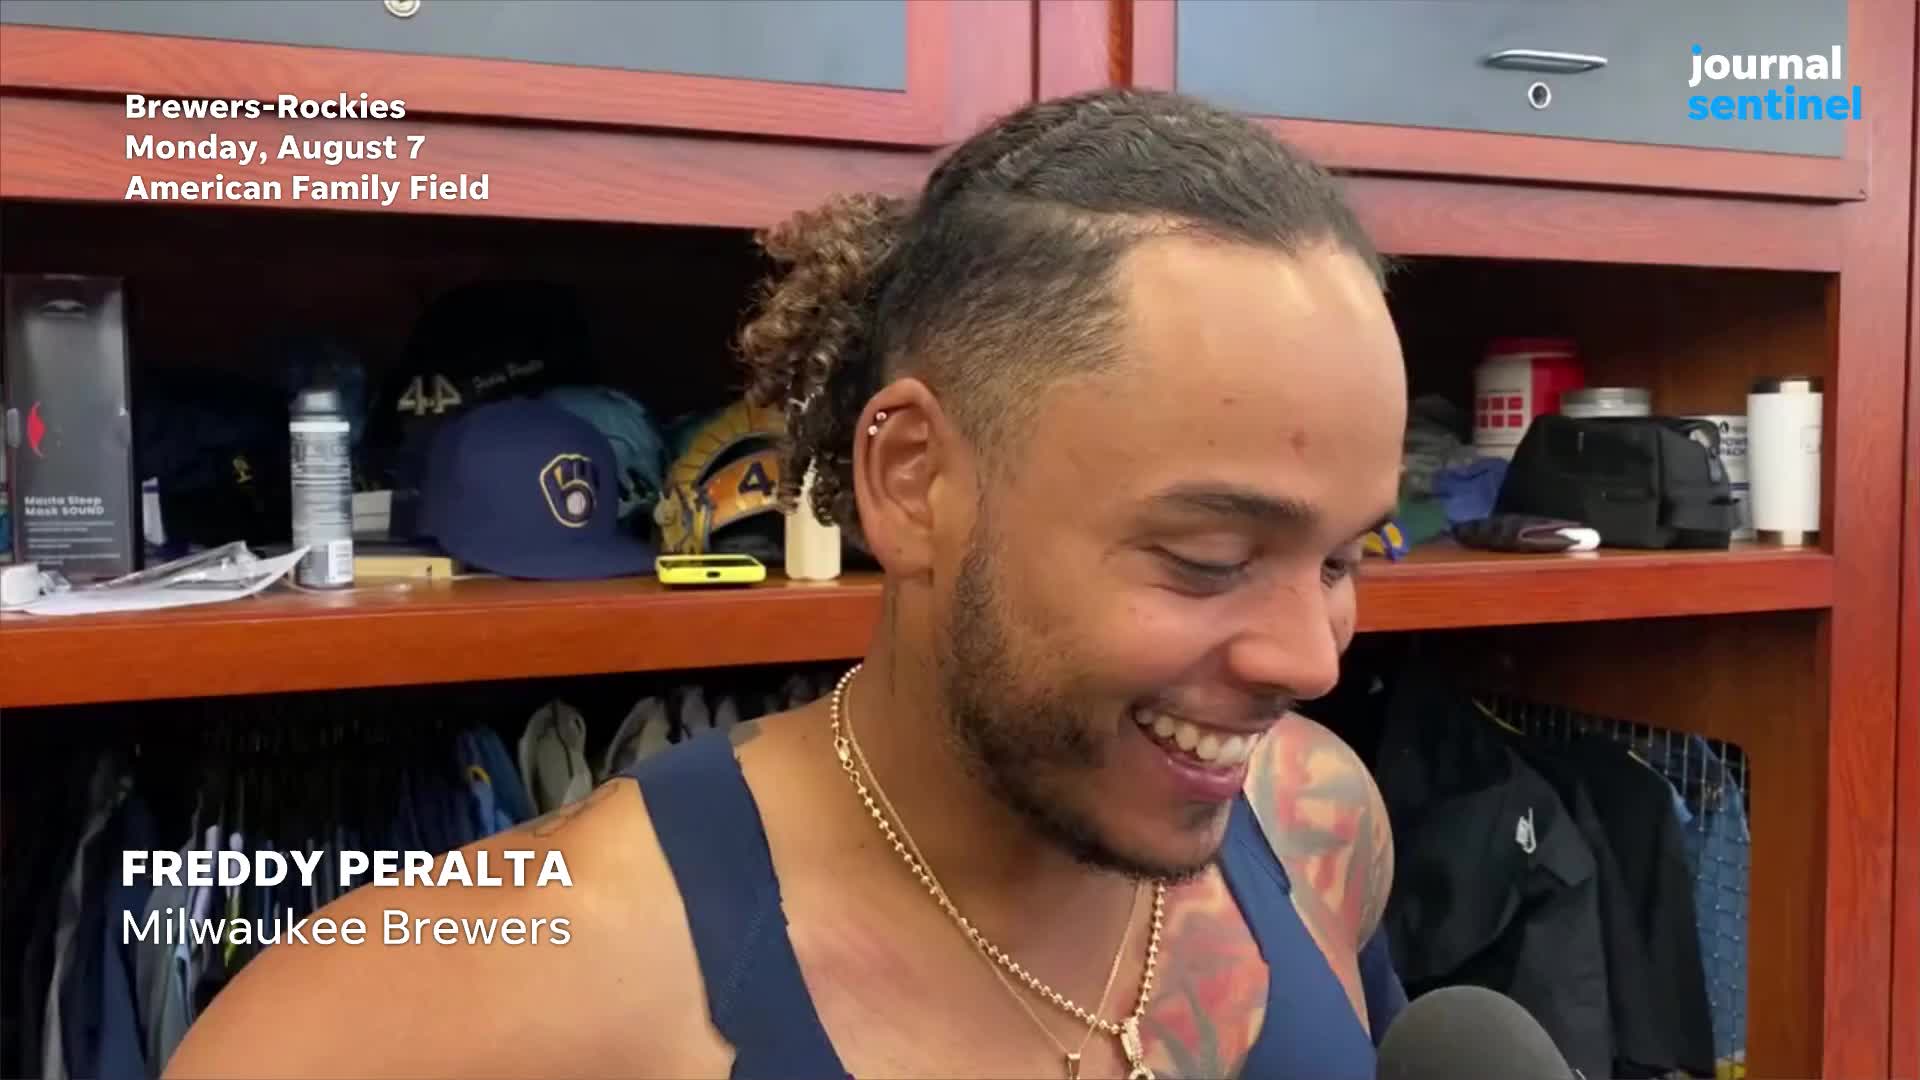 Freddy Peralta matches career high with 13 Ks, Taylor homers to lead  Brewers past Reds 3-0 - ABC News